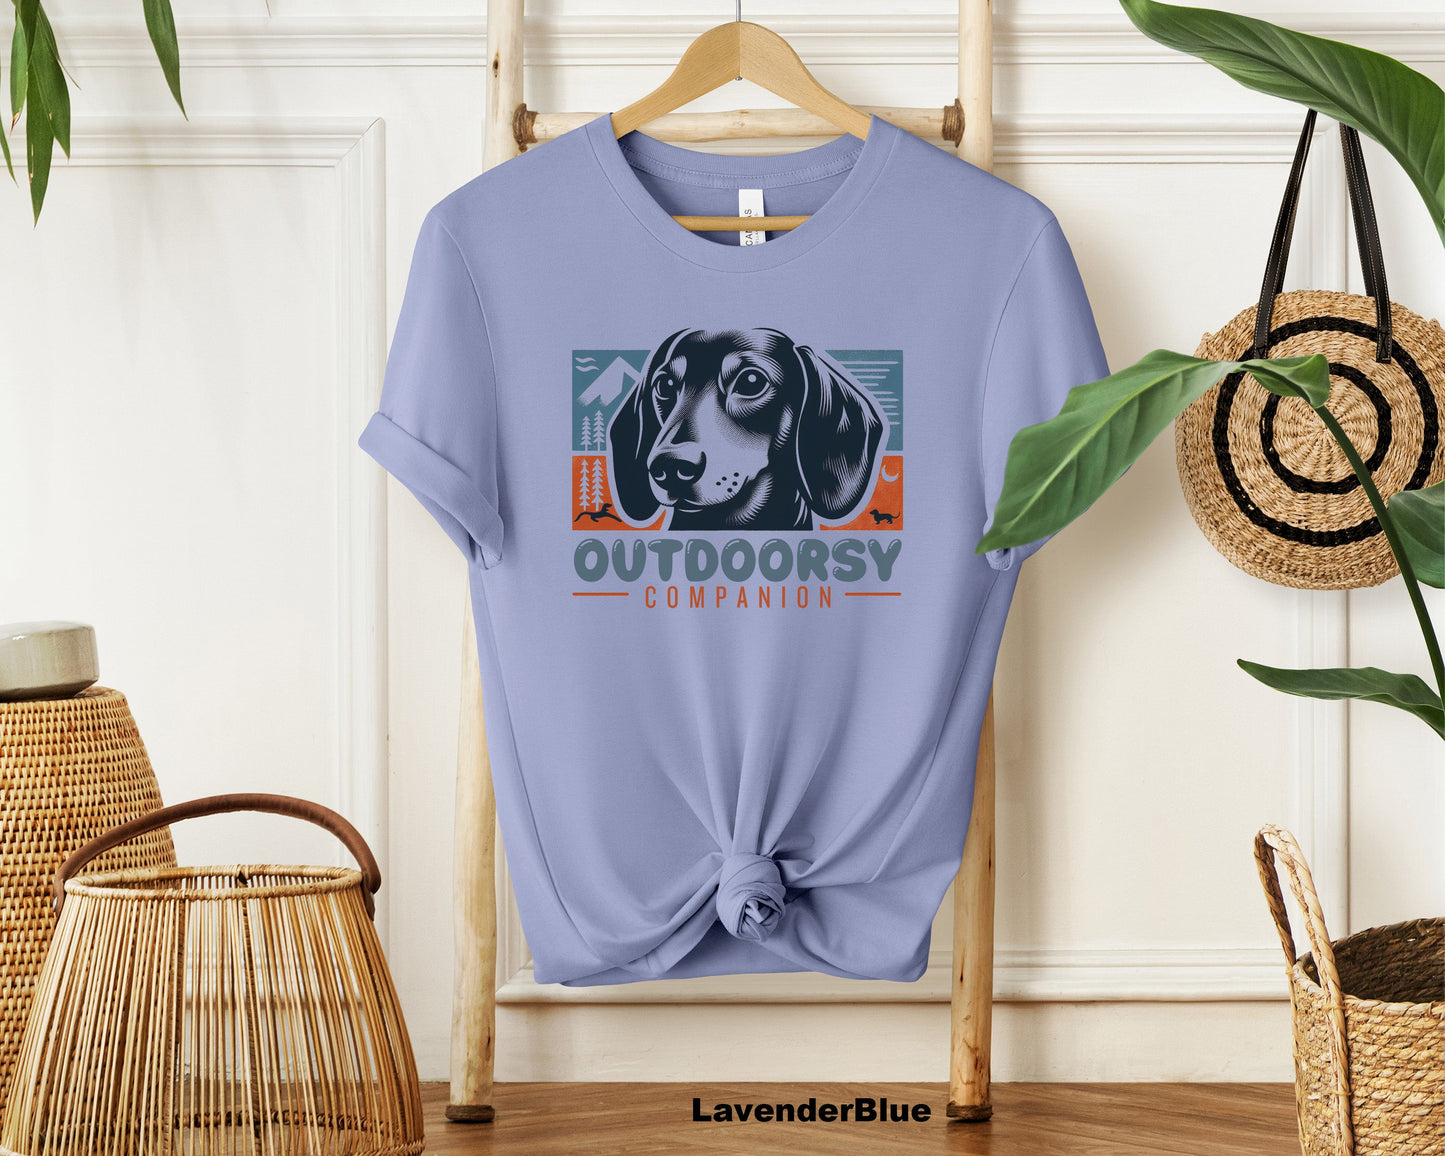 Dachshund Dog Lover Soft Cotton Crewneck T-Shirt with Cute Outdoorsy Print